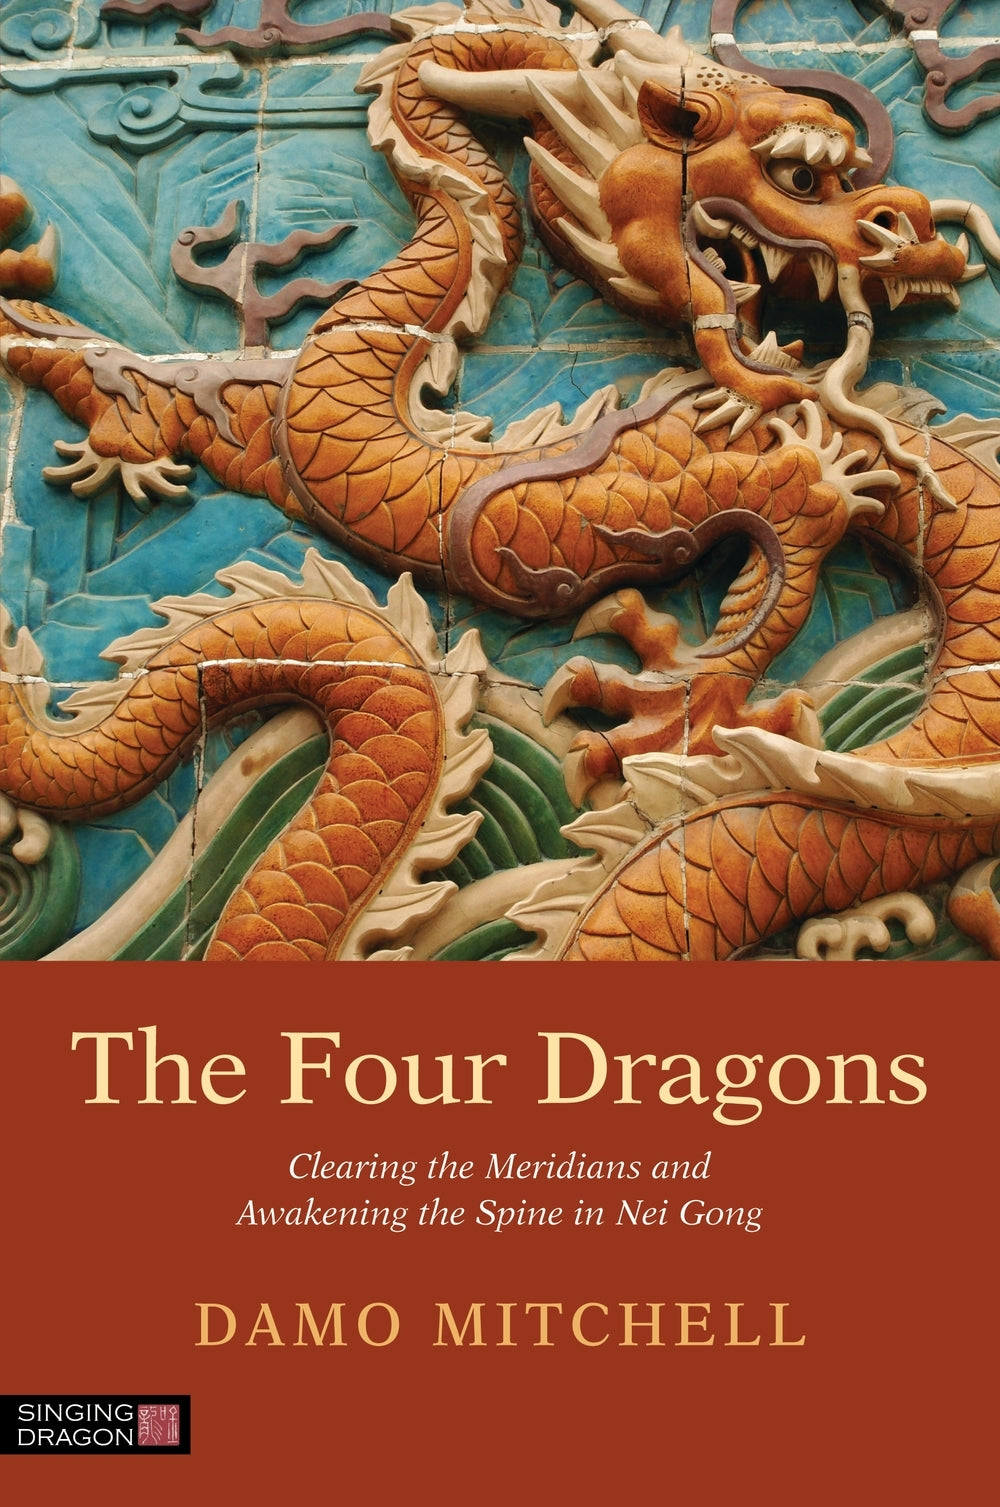 The Four Dragons by Damo Mitchell, Ole Saether